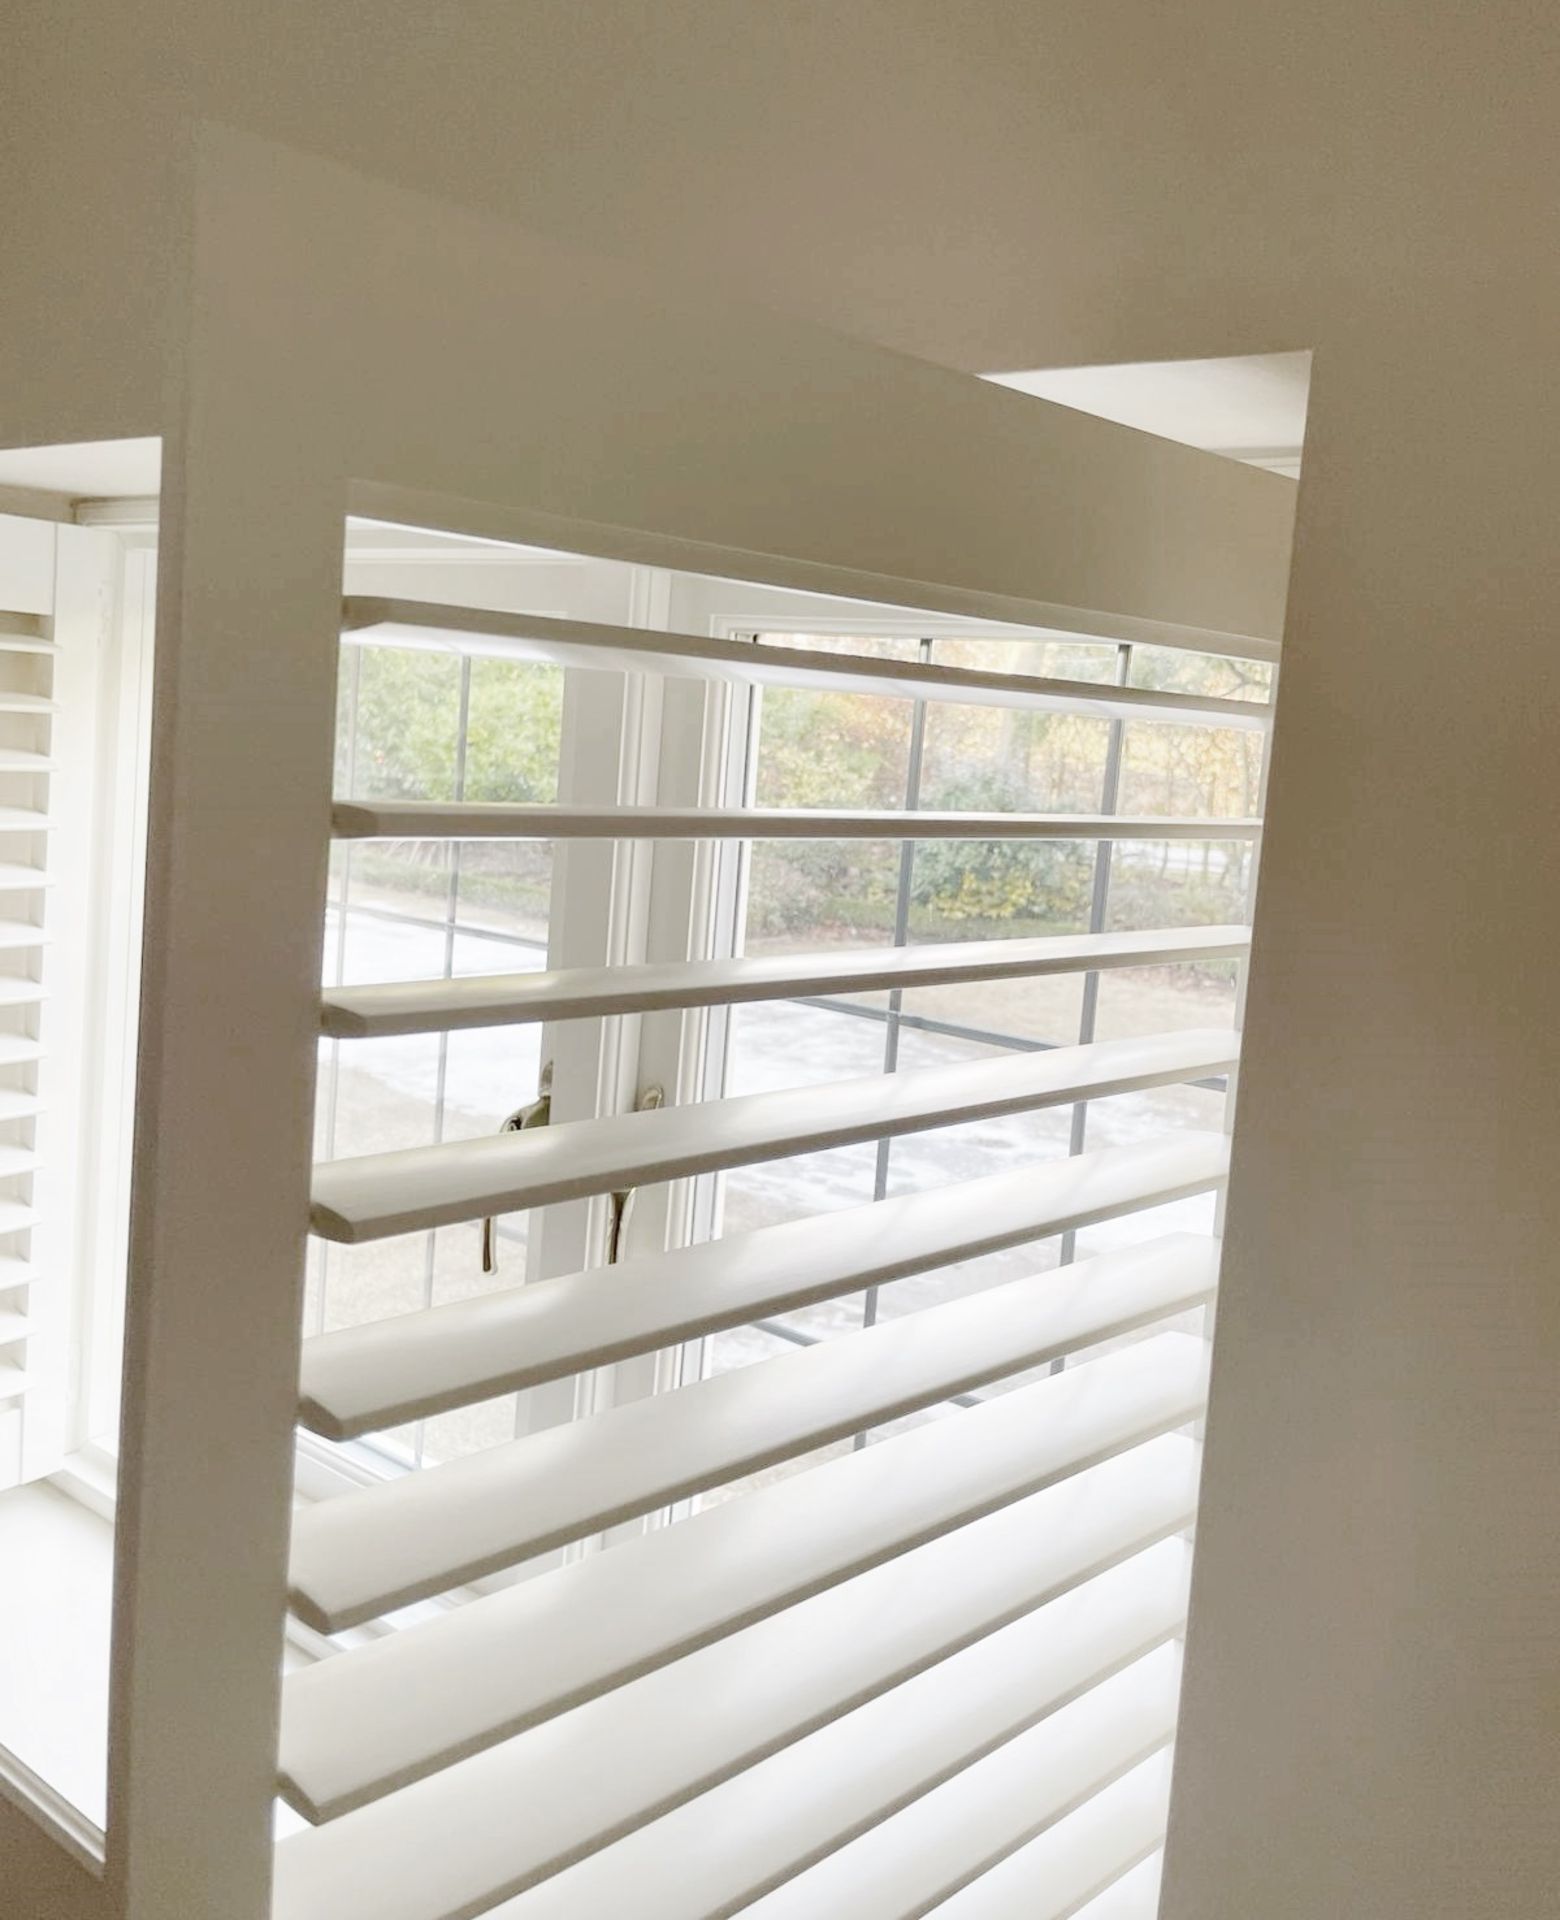 1 x Hardwood Timber Double Glazed Leaded 2-Pane Window Frame fitted with Shutter Blinds - Image 4 of 12